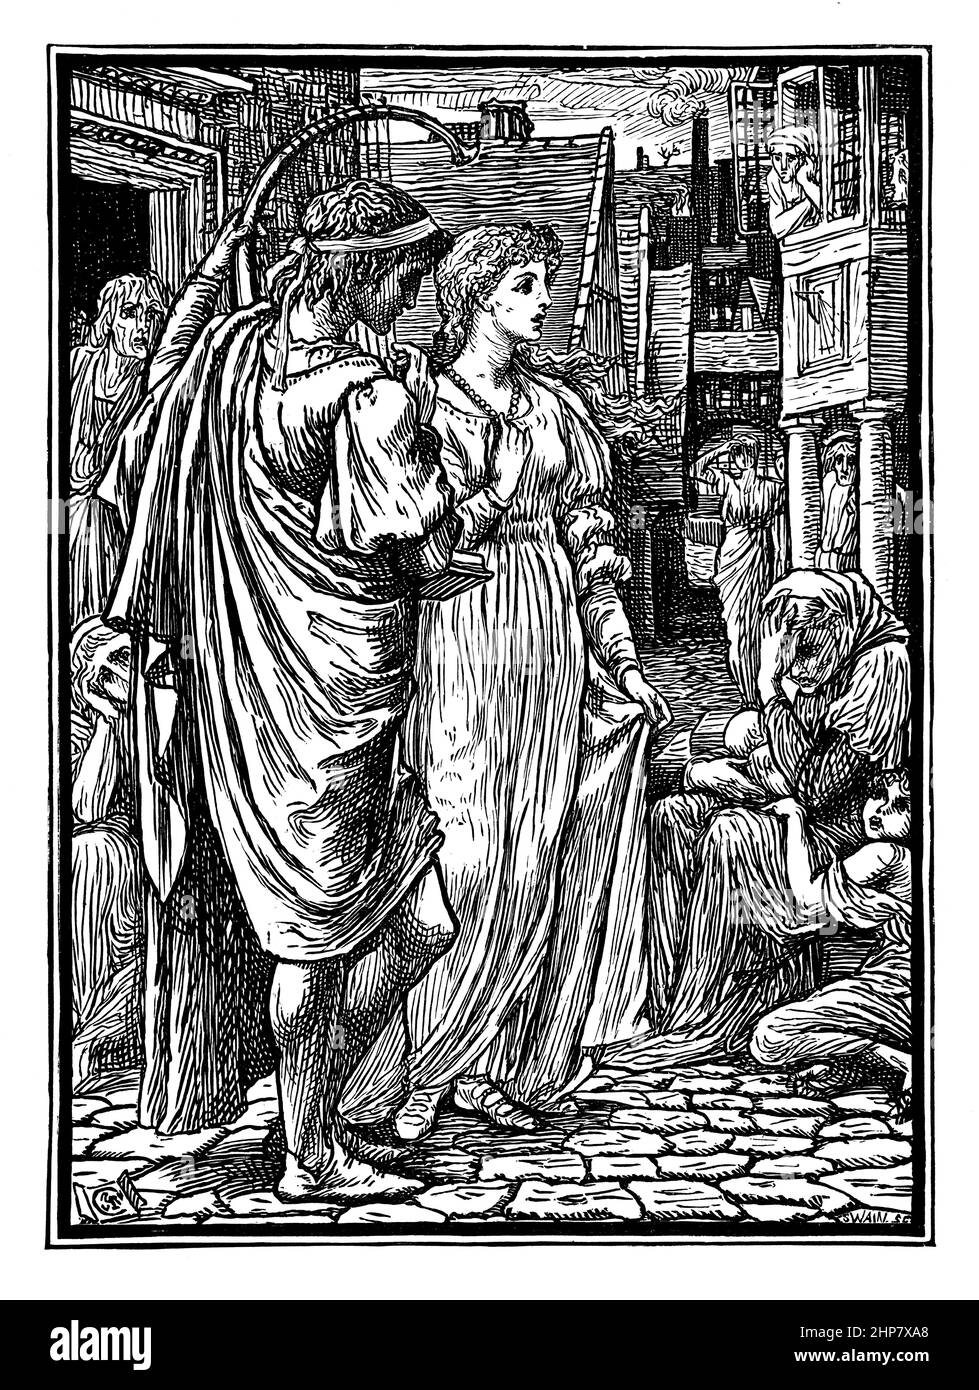 classically dressed figures in street, 1880 illustration by Walter Crane, from The Necklace of Princess Fiorimonde, by Mary de Morgan, published by Ma Stock Photo